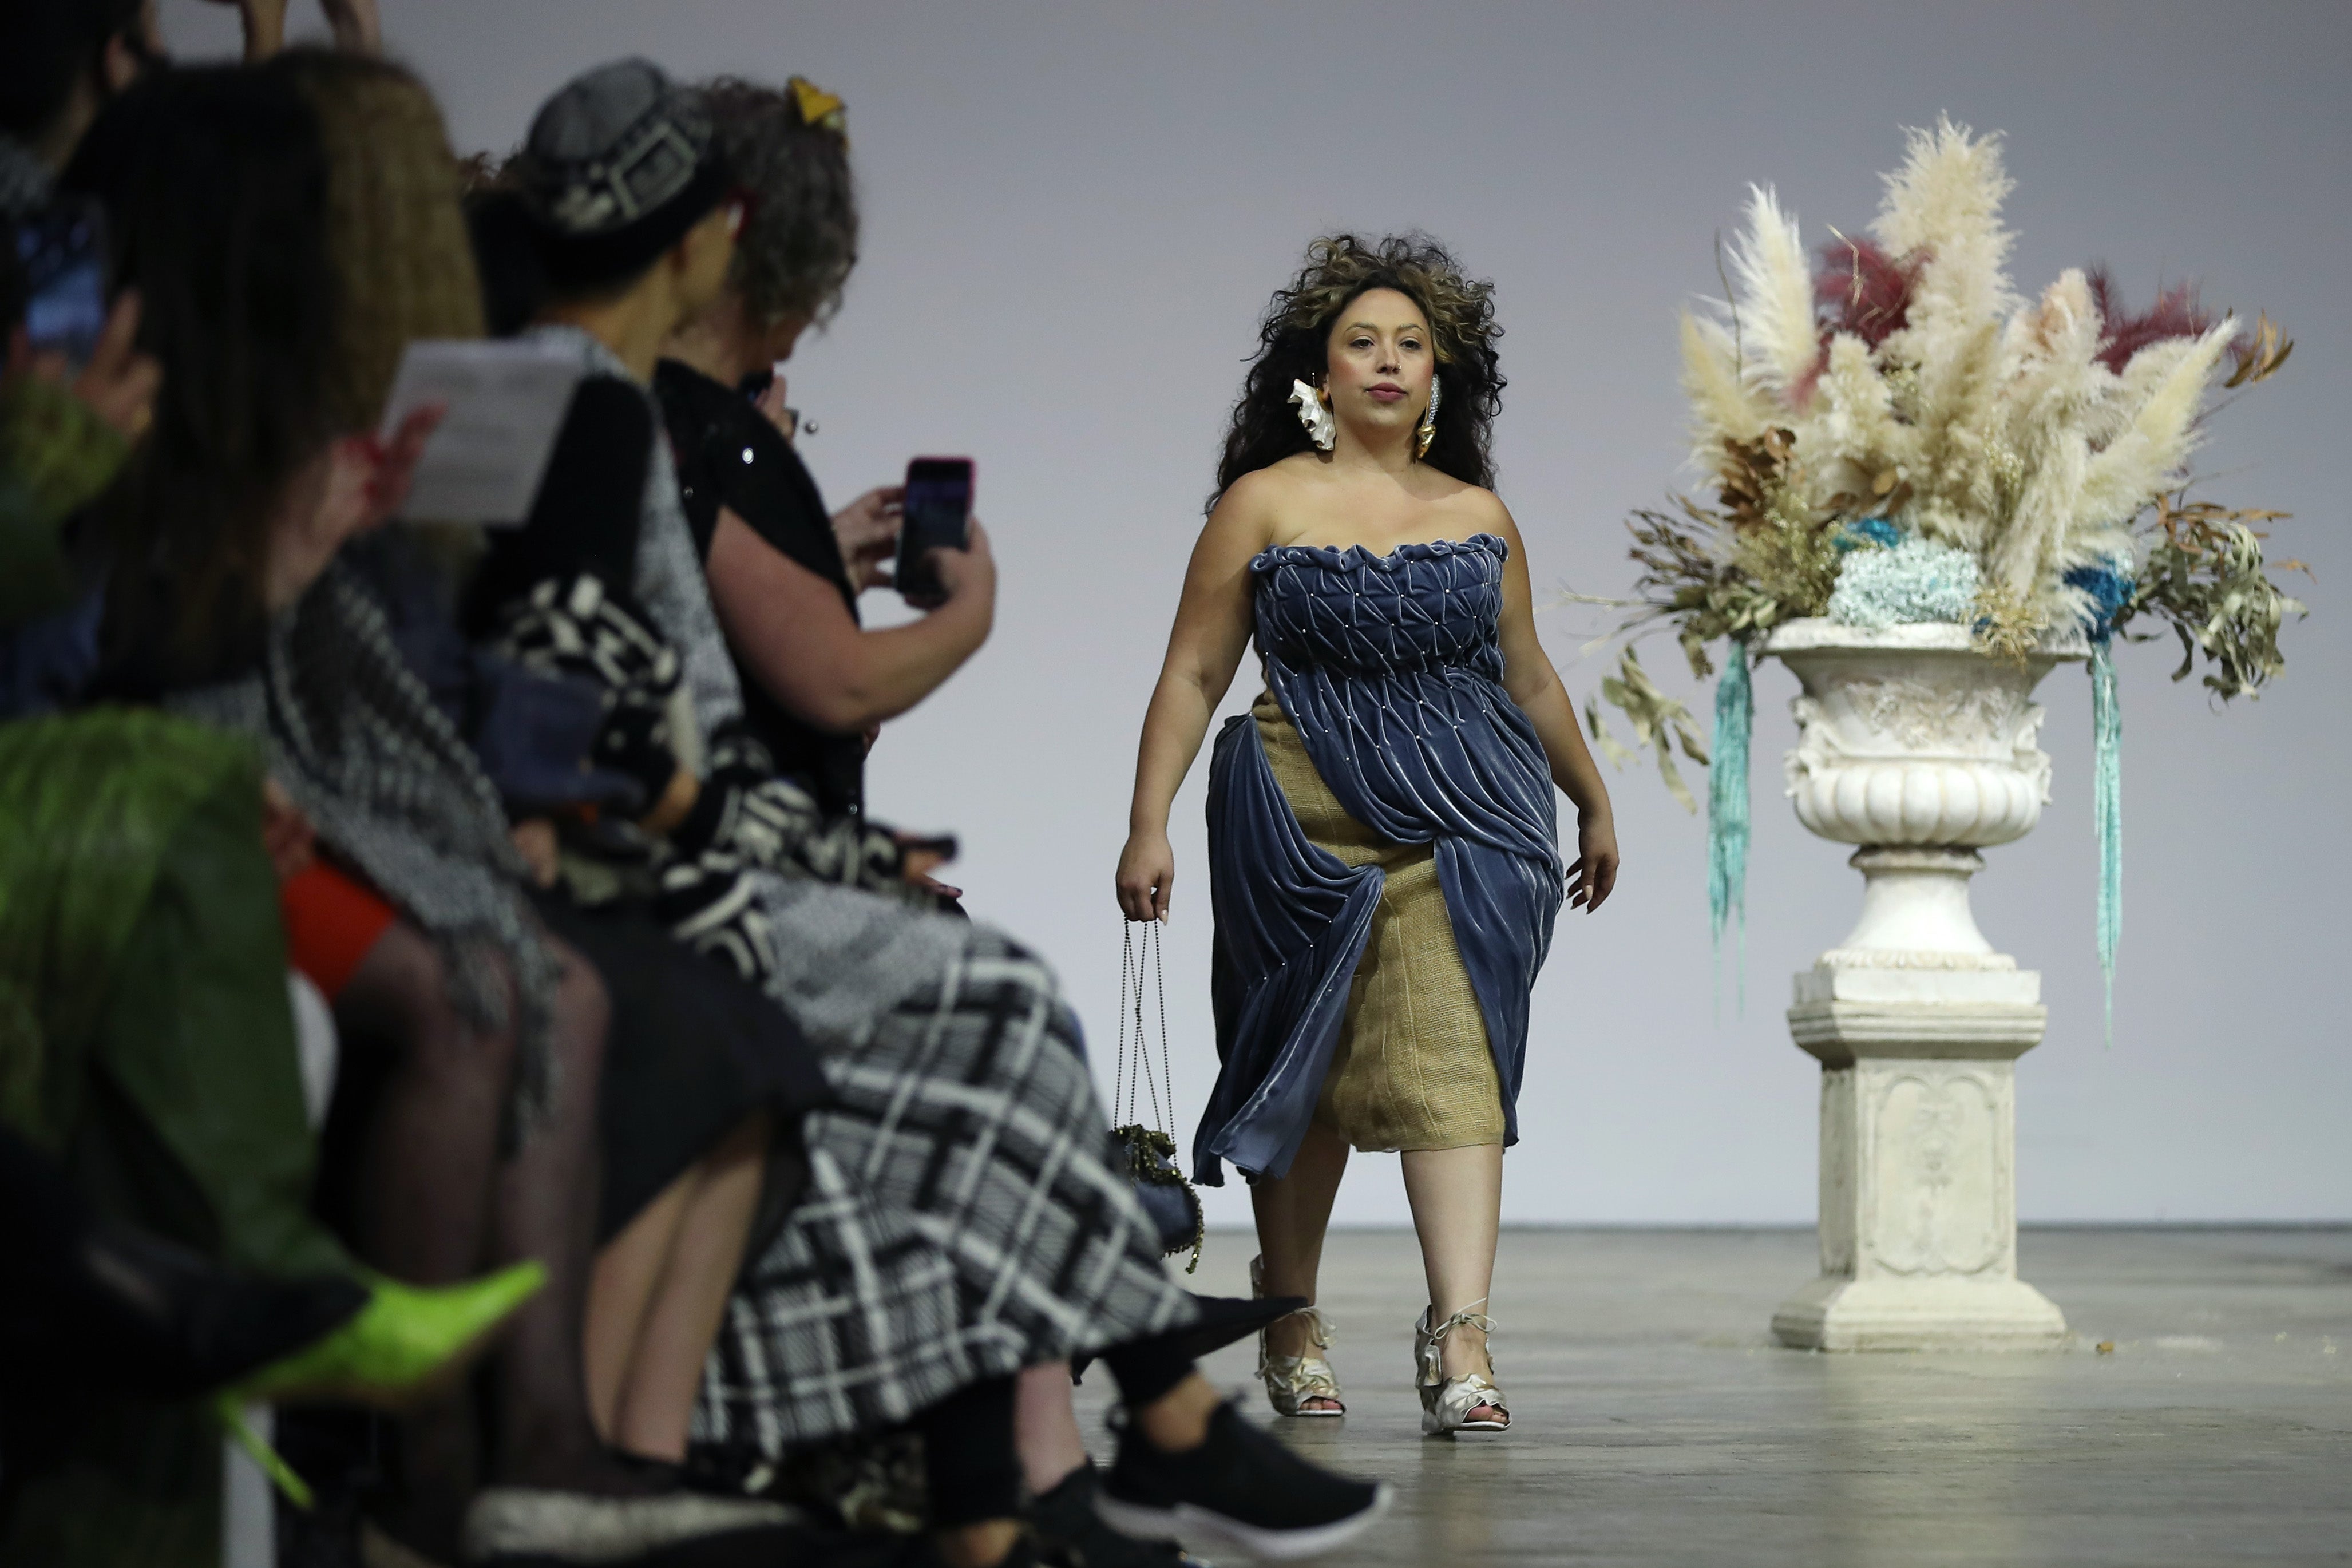 10 Industry Leaders on Plus-Size Representation at Fashion Week